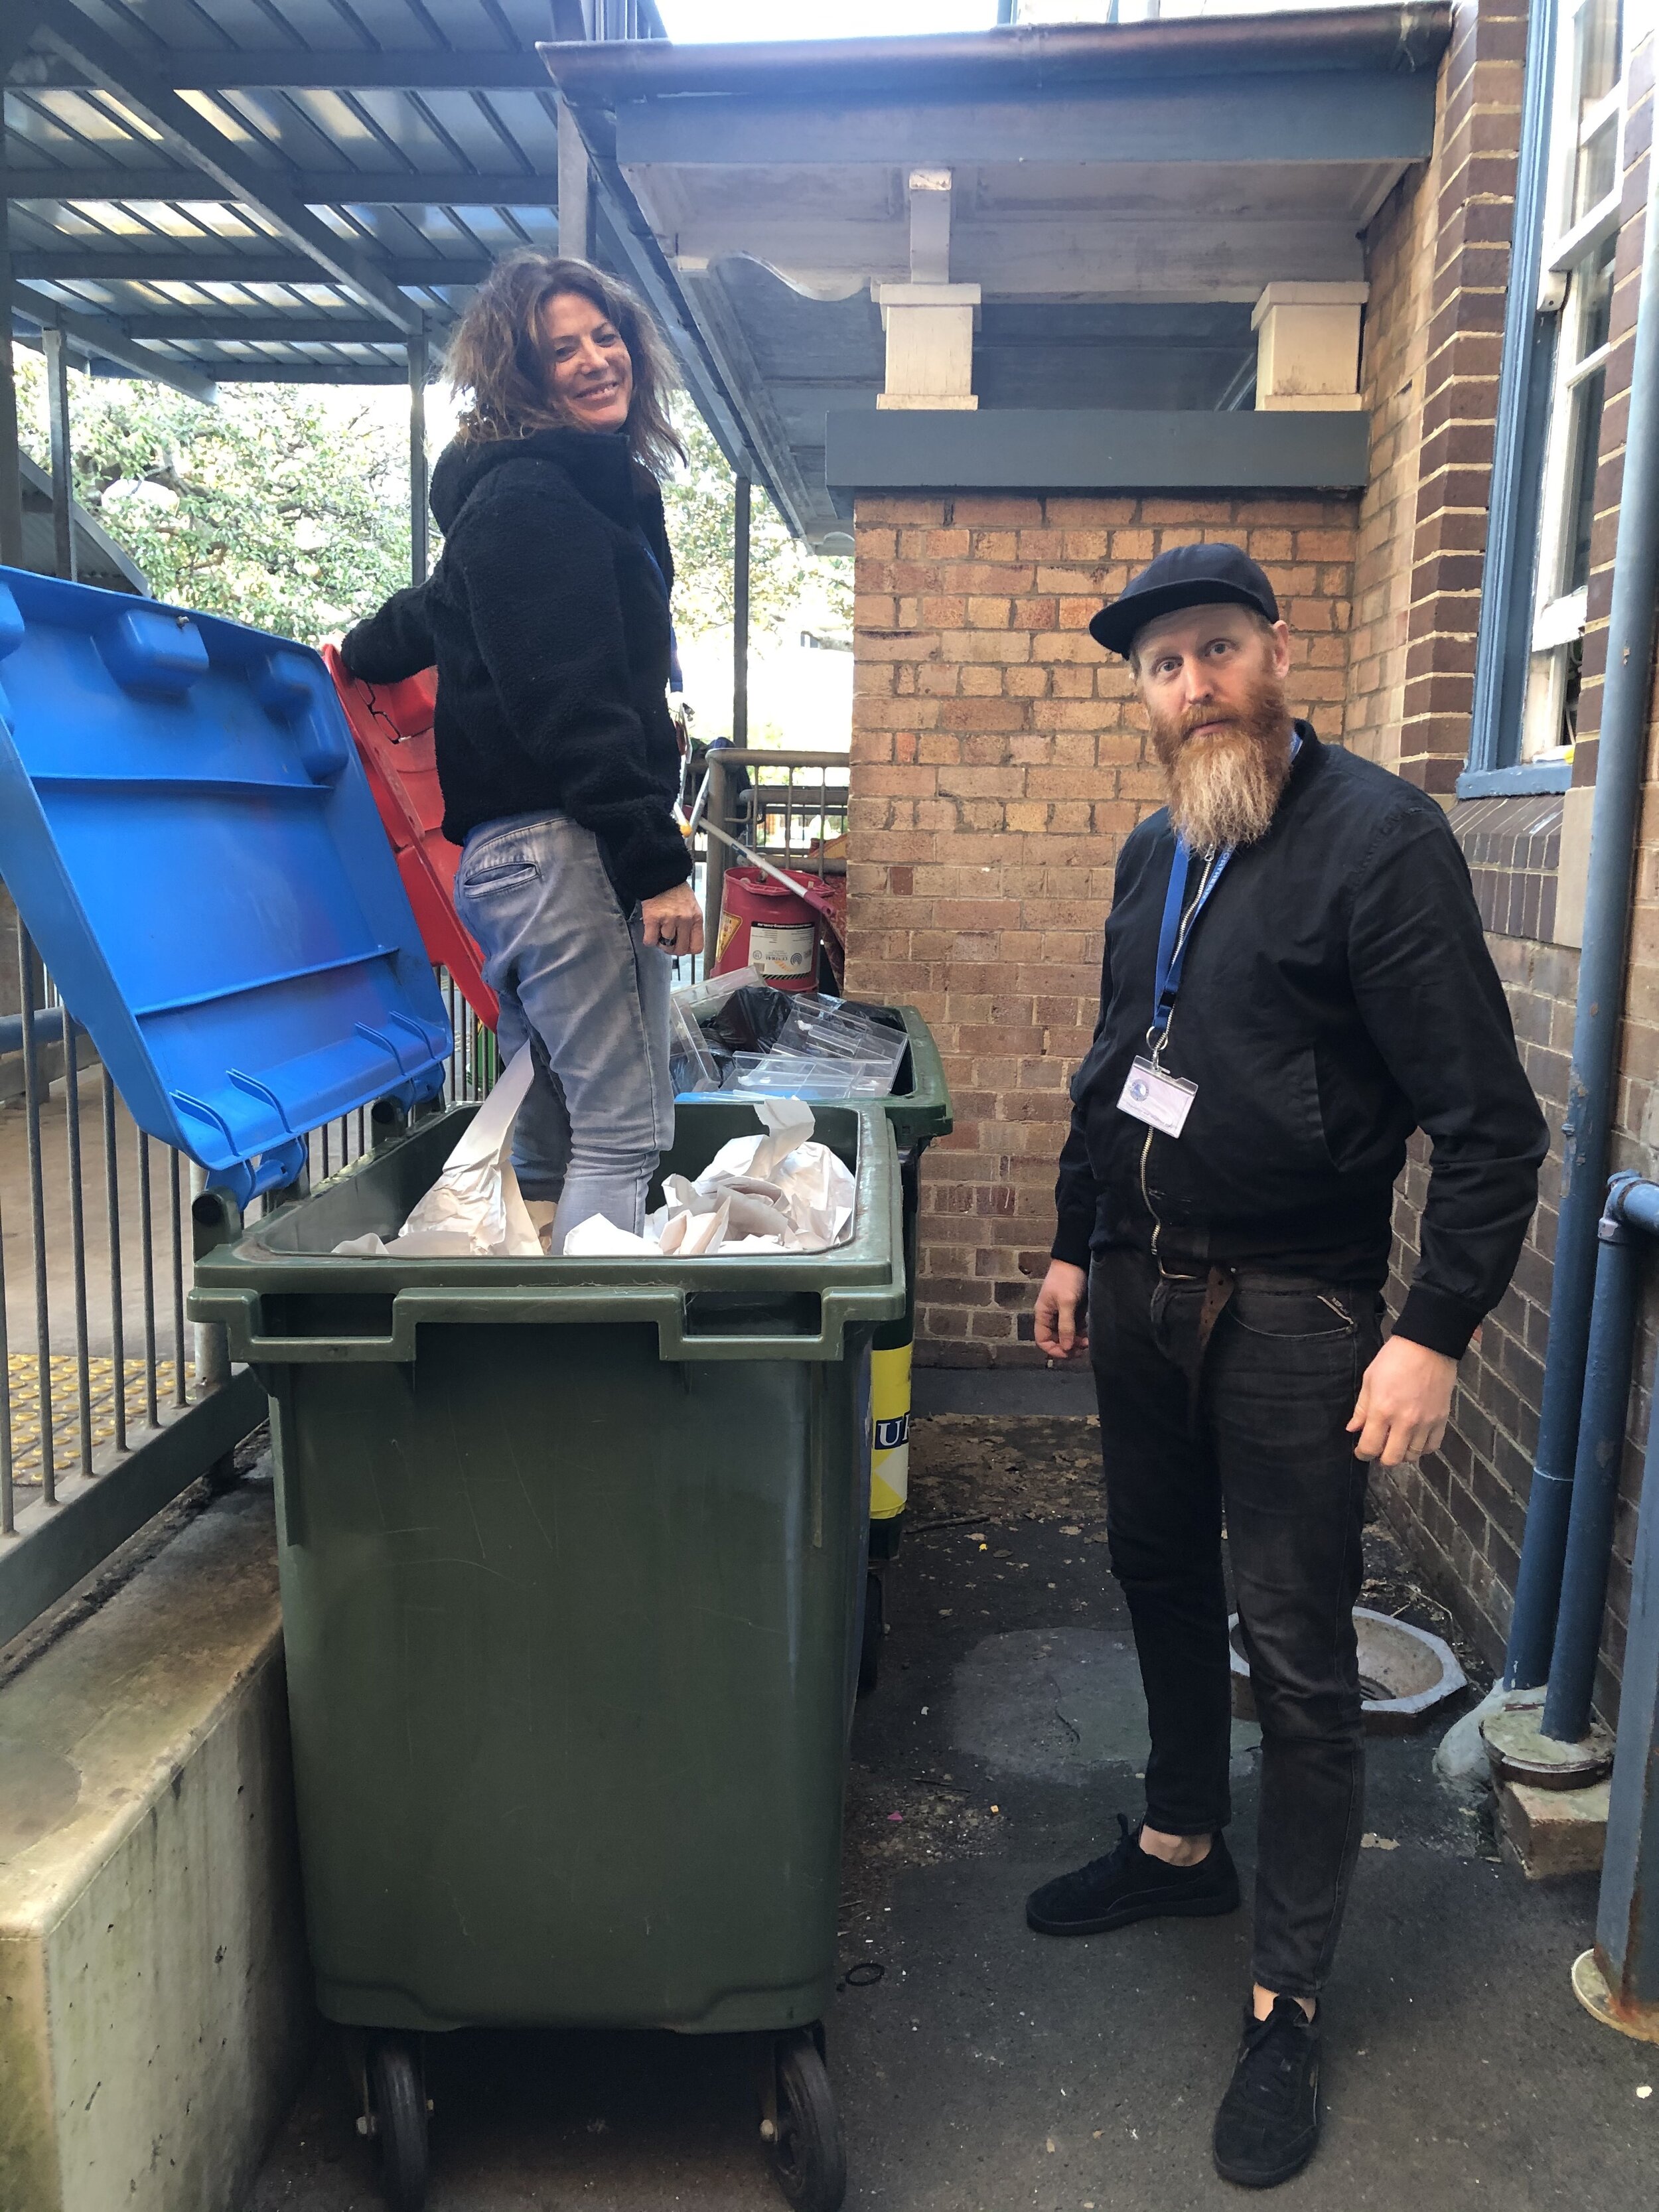 Bec and Daniel (Homeless Outreach Service) working hard to set up the new premises!